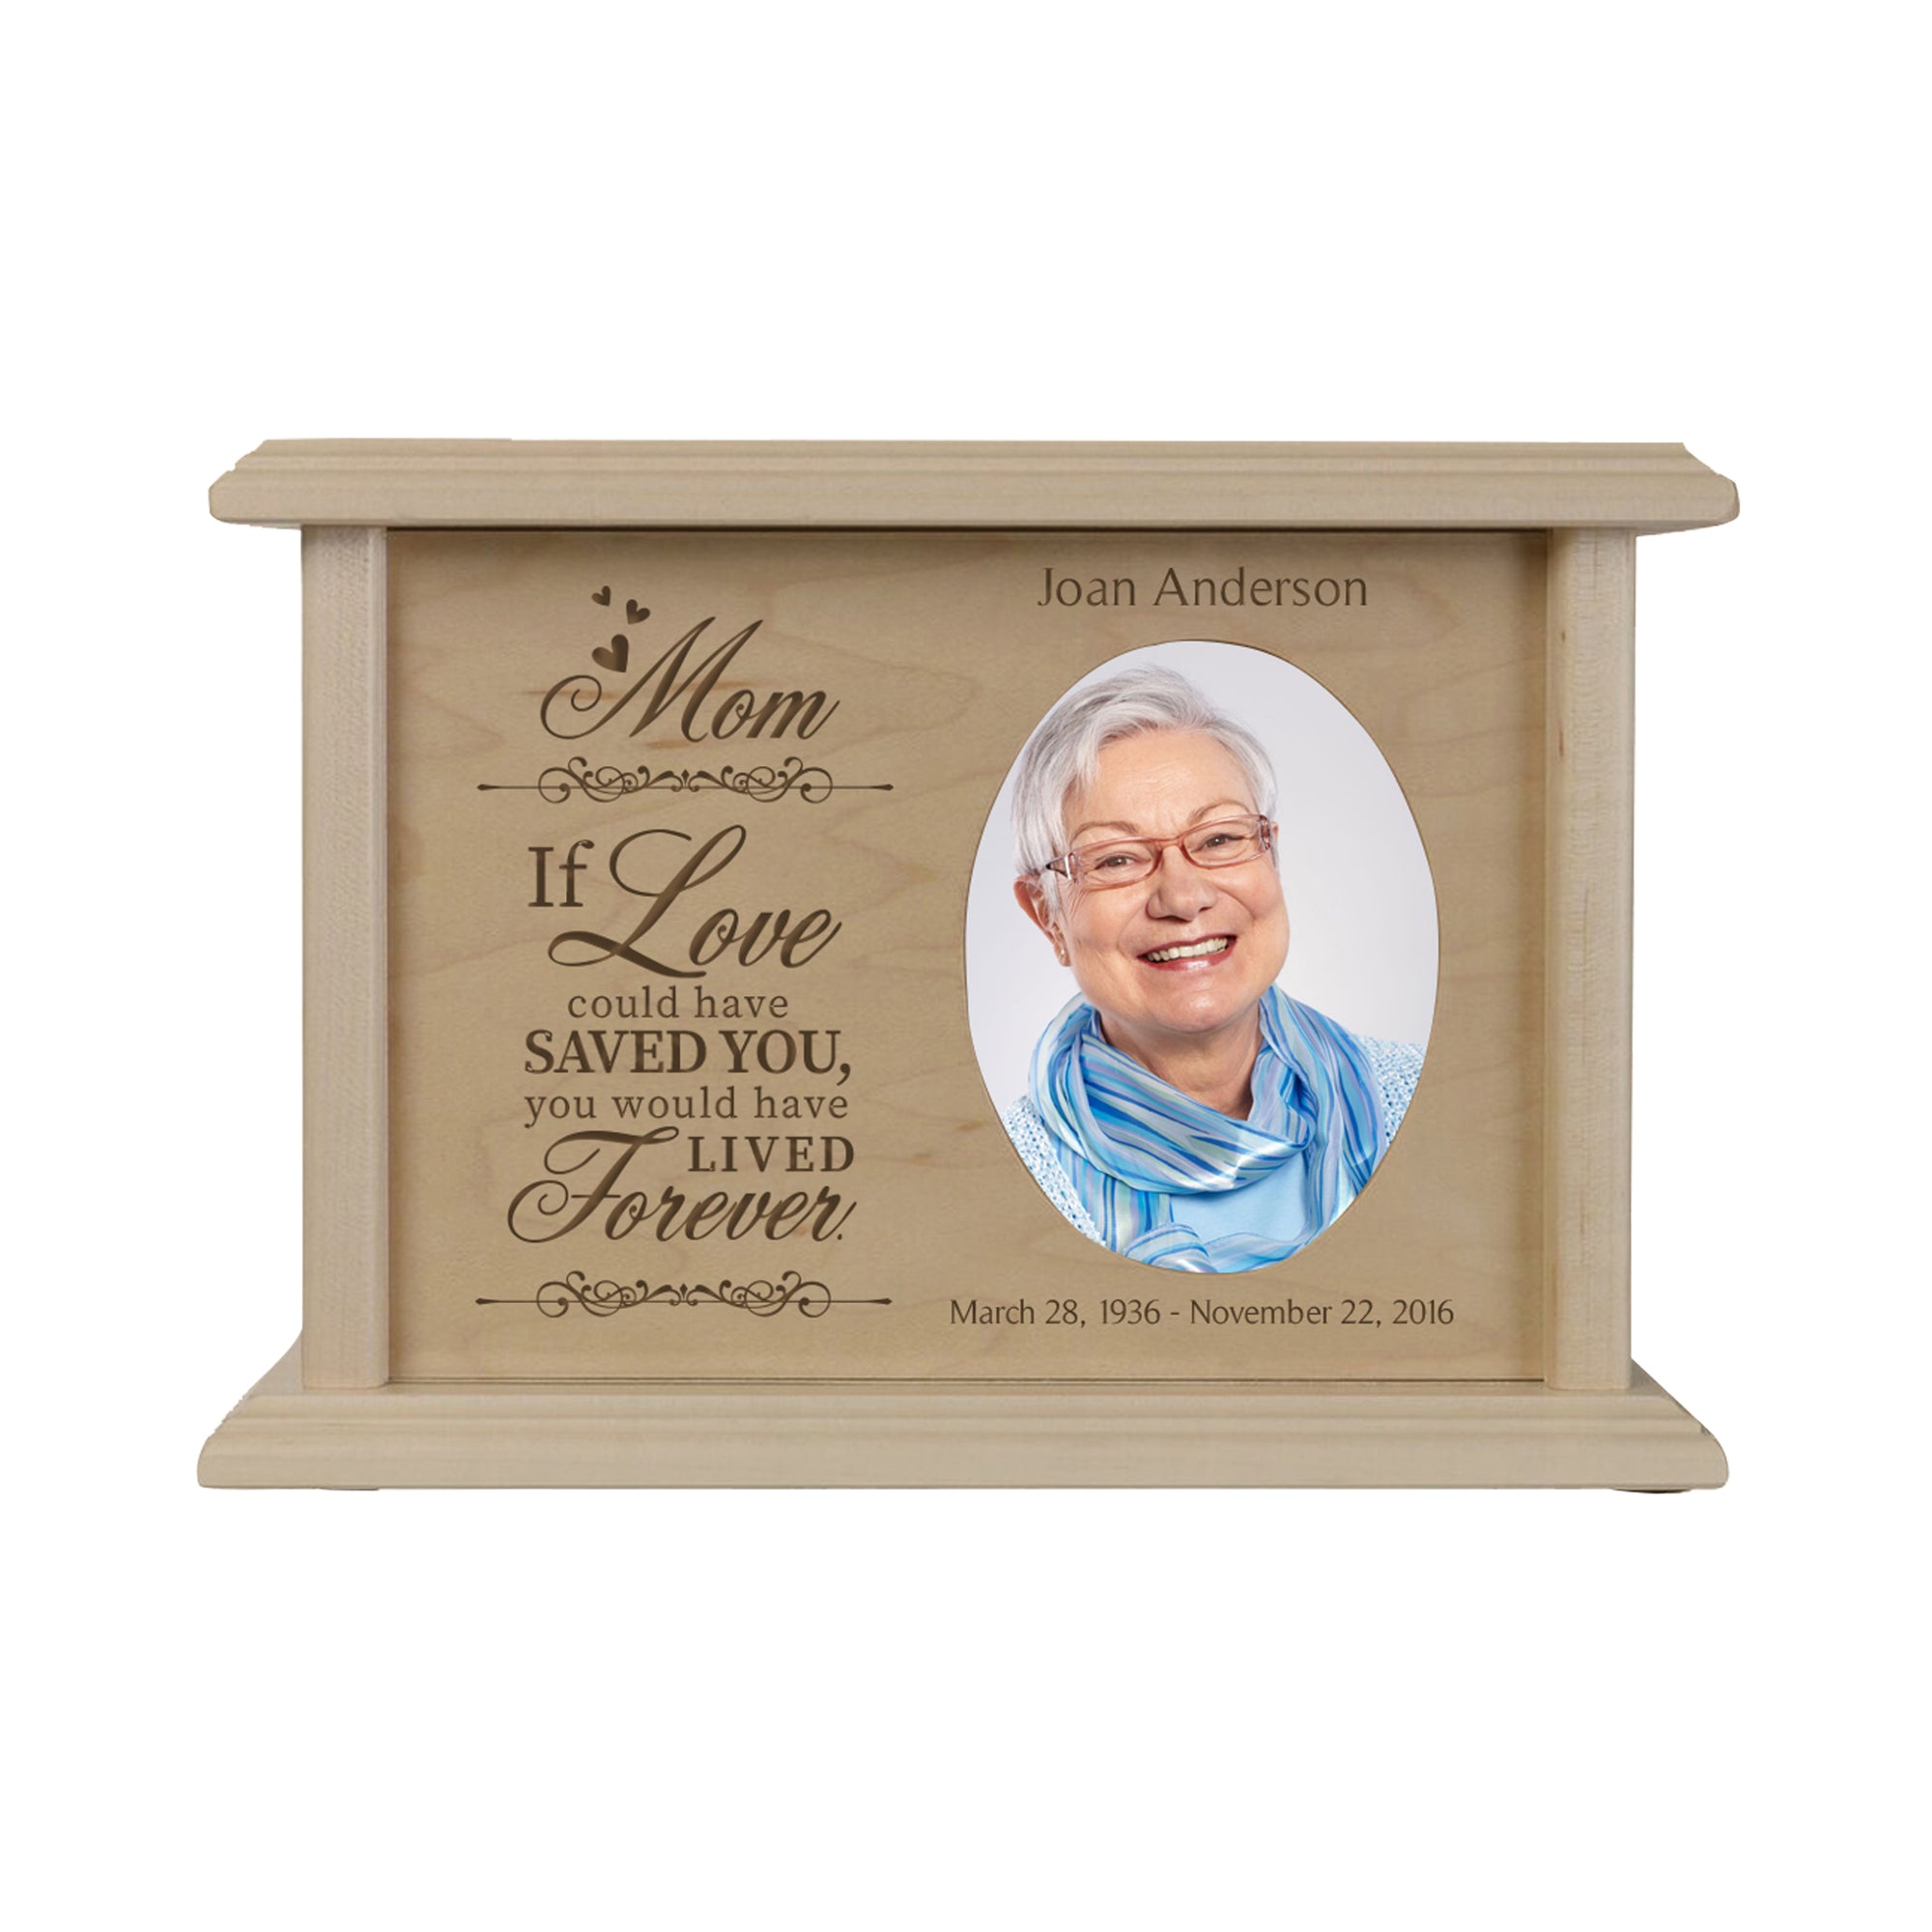 Lifesong Memorials Custom Memorial Urn Box holds 2x3 photo and 65 cu in Mom, If Love Could. Sympathy Gift for the Loss of a Loved One Bereavement Condolence Sympathy Comfort Keepsake Funeral Decoration. Cremation Urns, urn for ashes, urns for humans, urns for dad, urns for mom, urns for sale, urns for human ashes, Pet keepsake urns, pet urns, cherished urns, small urns, small urns for ashes, Wooden Urns, Wooden Keepsake Urn, Wood Cremation Urns.